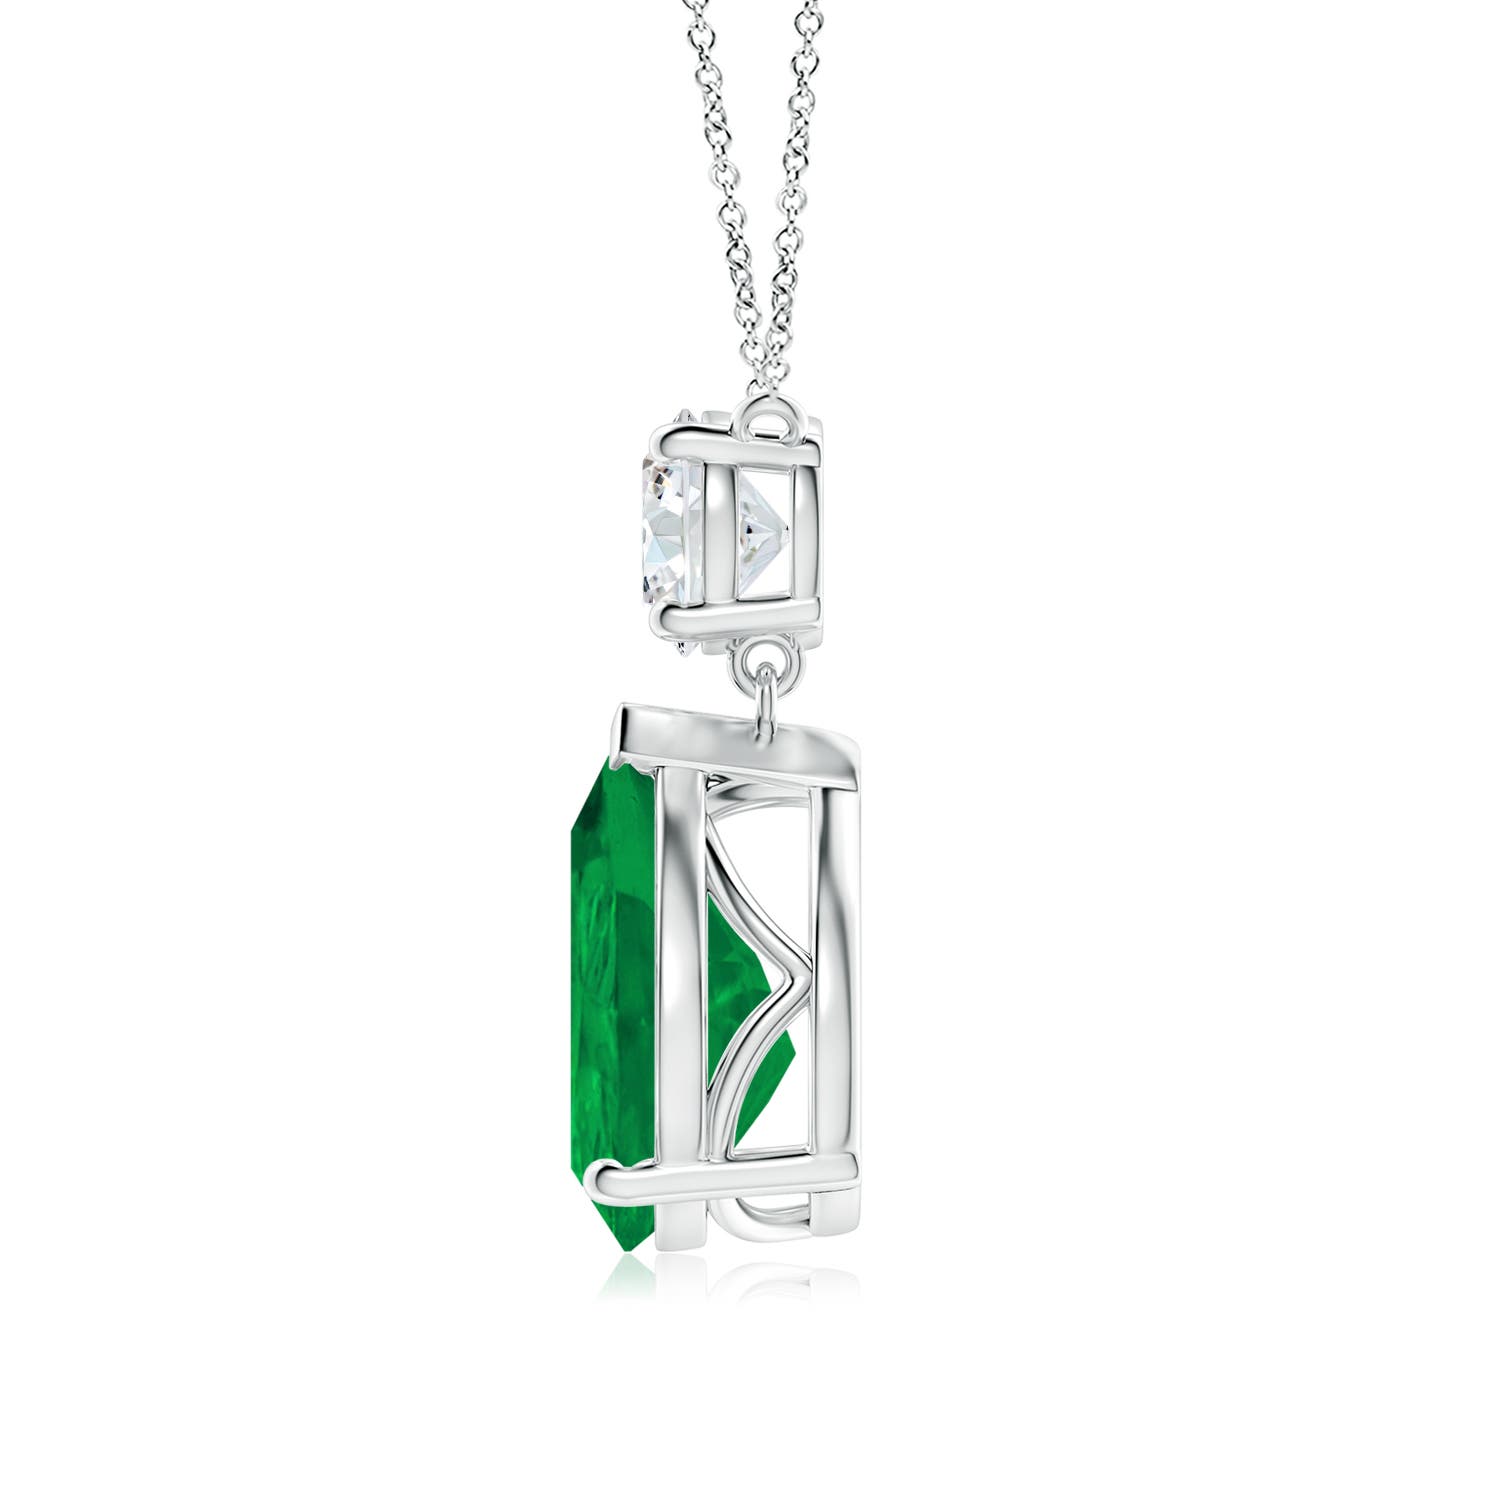 AA - Emerald / 5.21 CT / 18 KT White Gold